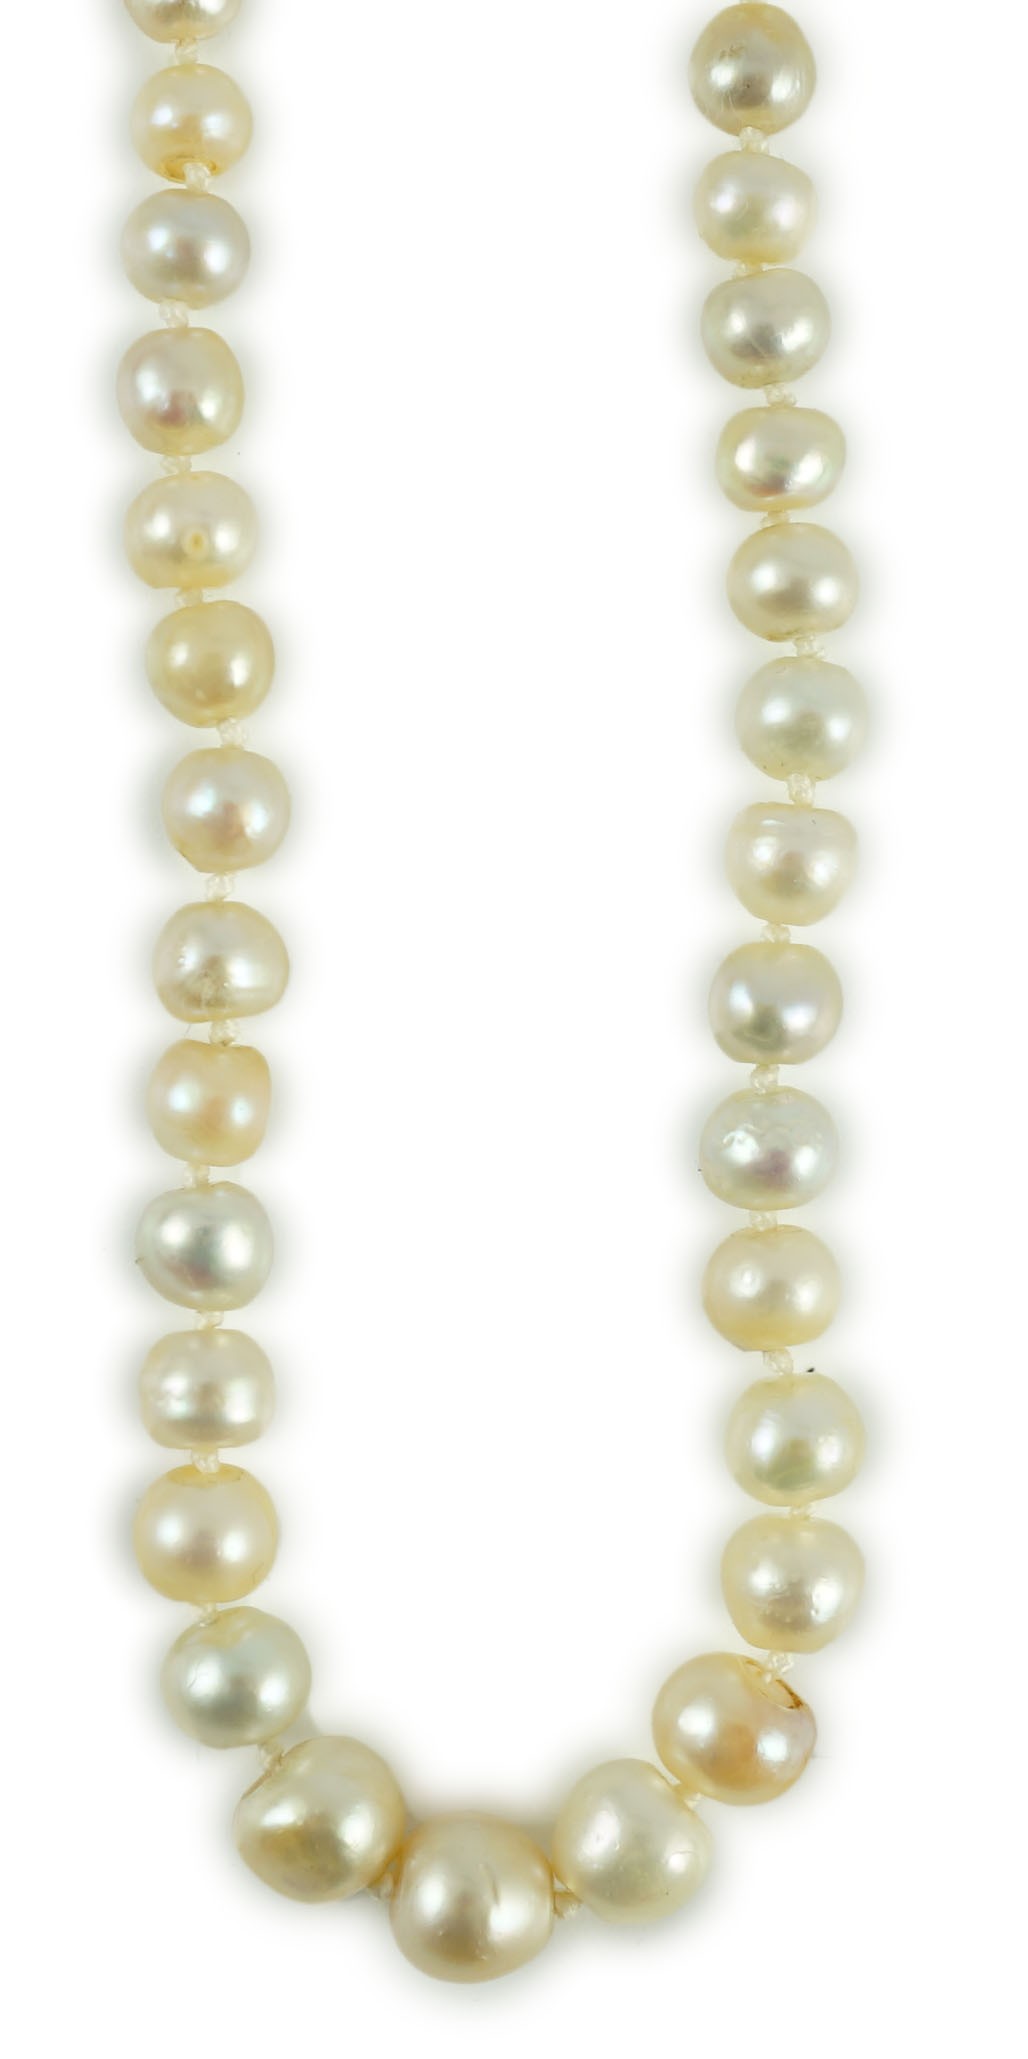 A single strand graduated natural saltwater pearl necklace